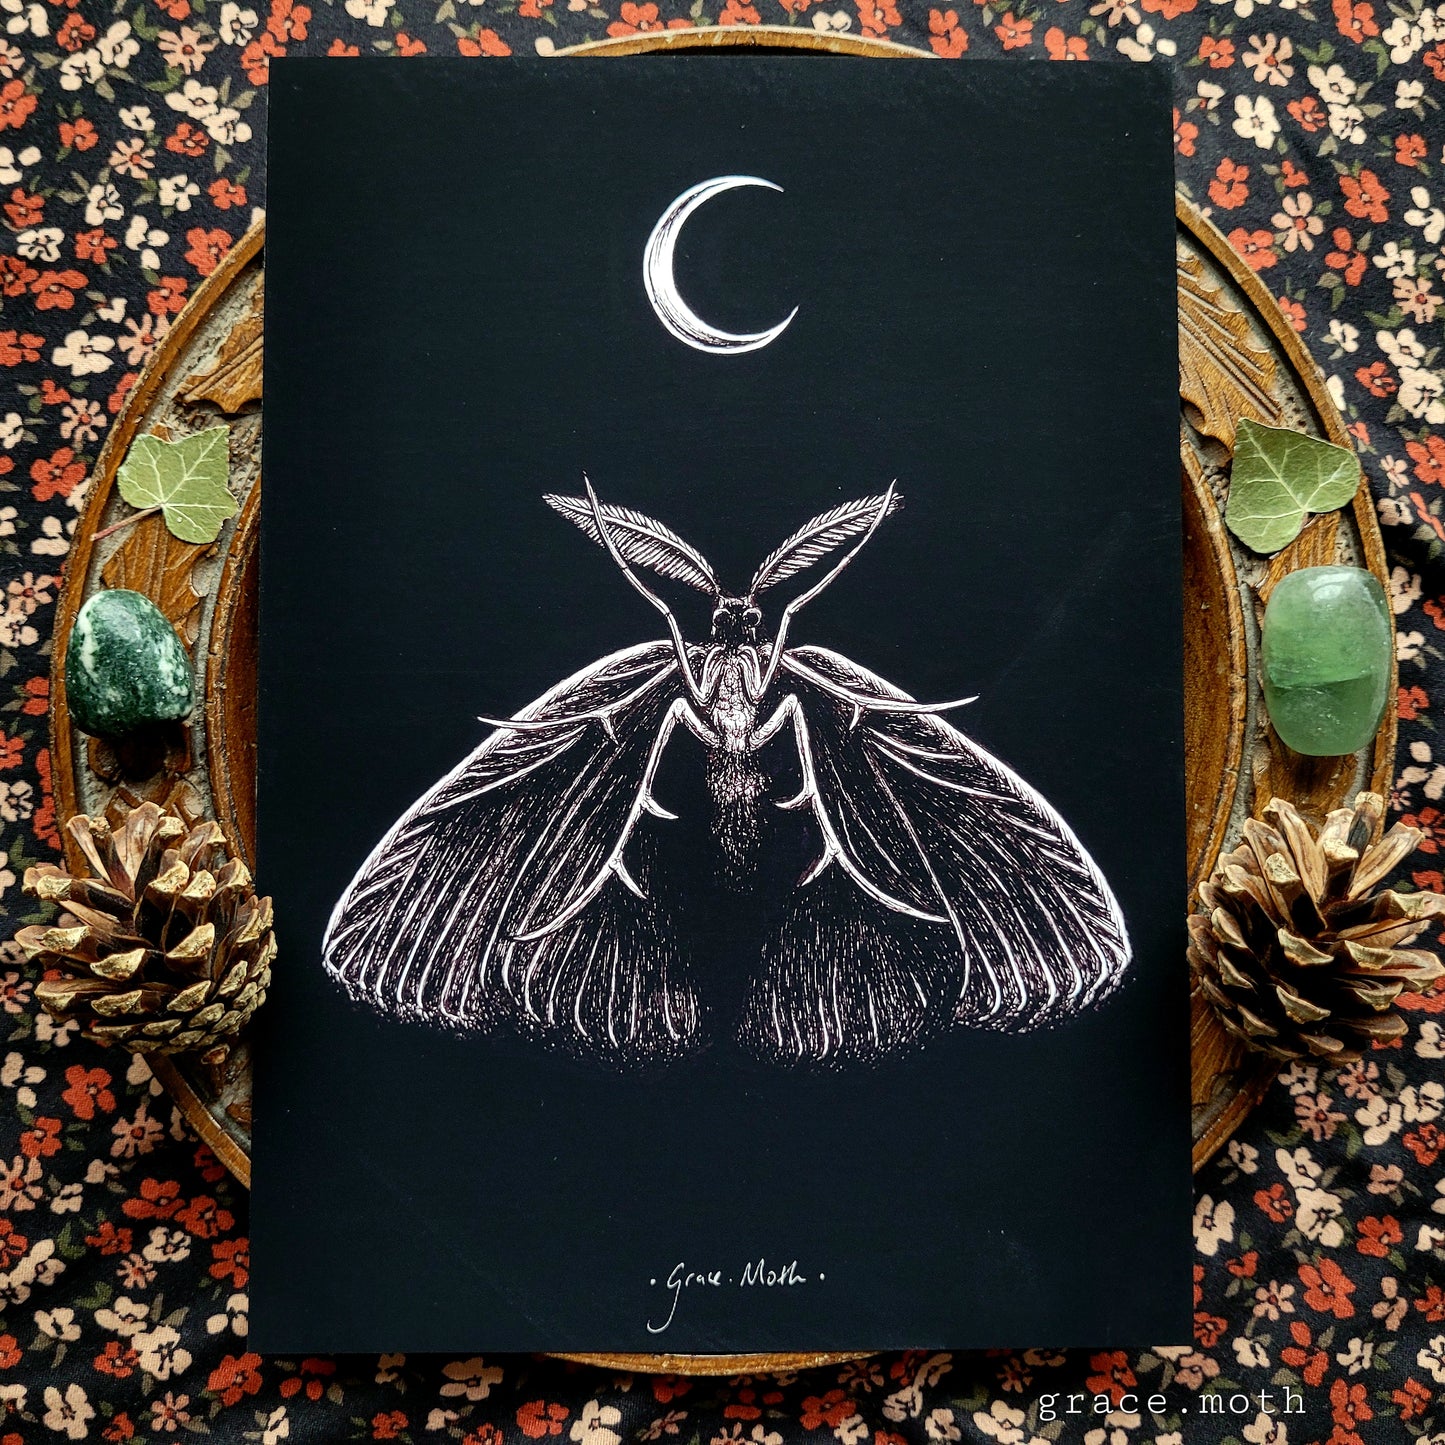 Dark Moth - A5 A4 or A3 art print illustrated by Grace Moth - Cottagecore - Witchy - Gothic